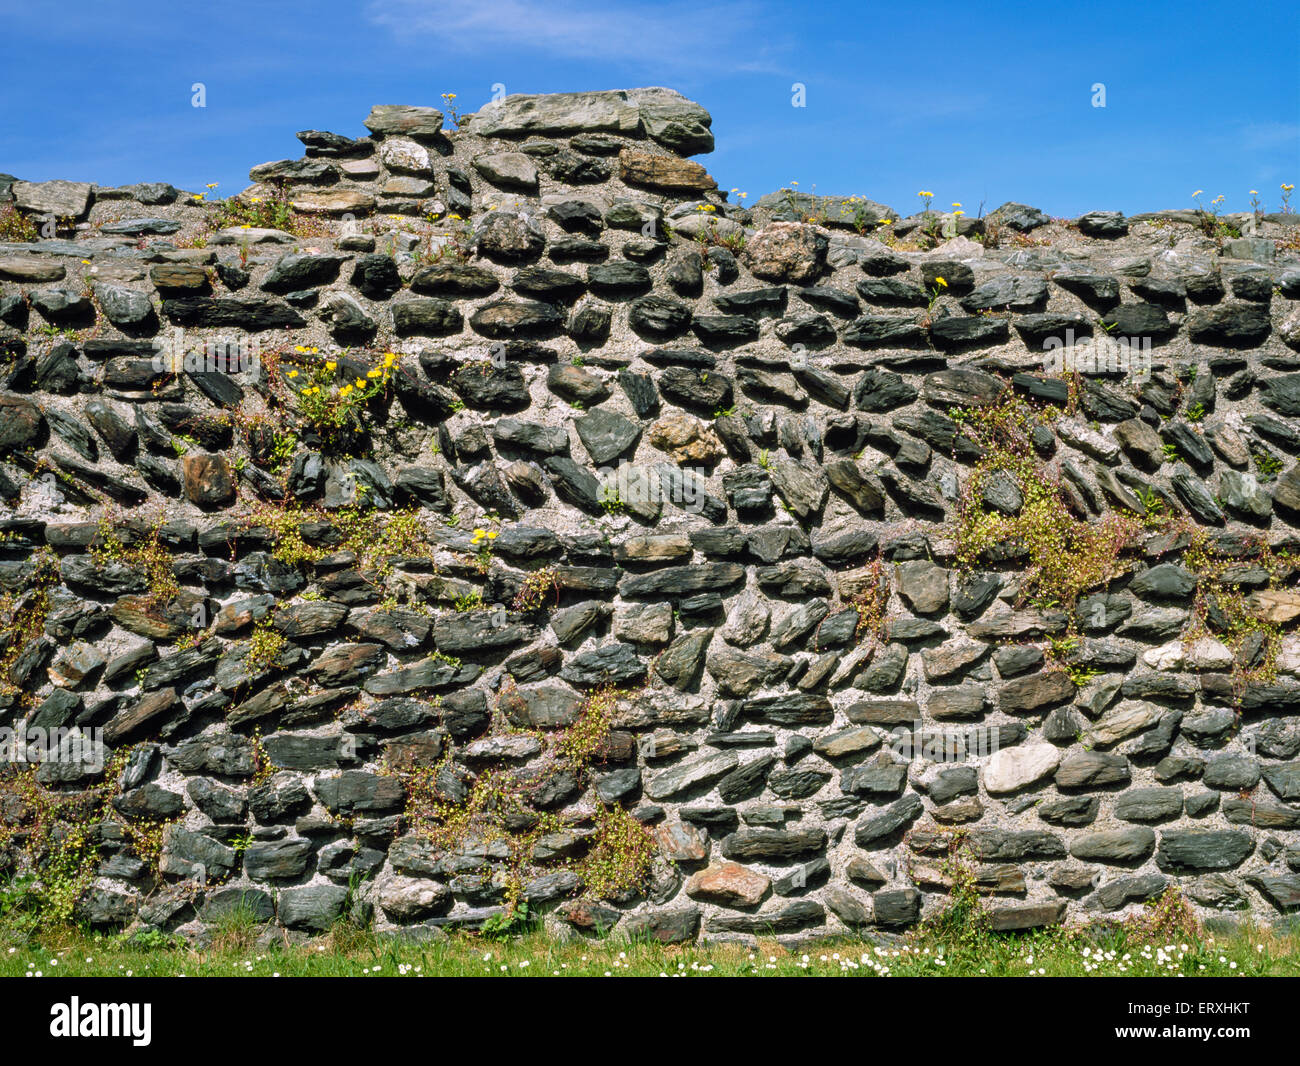 Detail of plants growing in the banded & angled stonework of the northern wall of Caer Gybi Roman naval base, Holyhead, Anglesey. Stock Photo